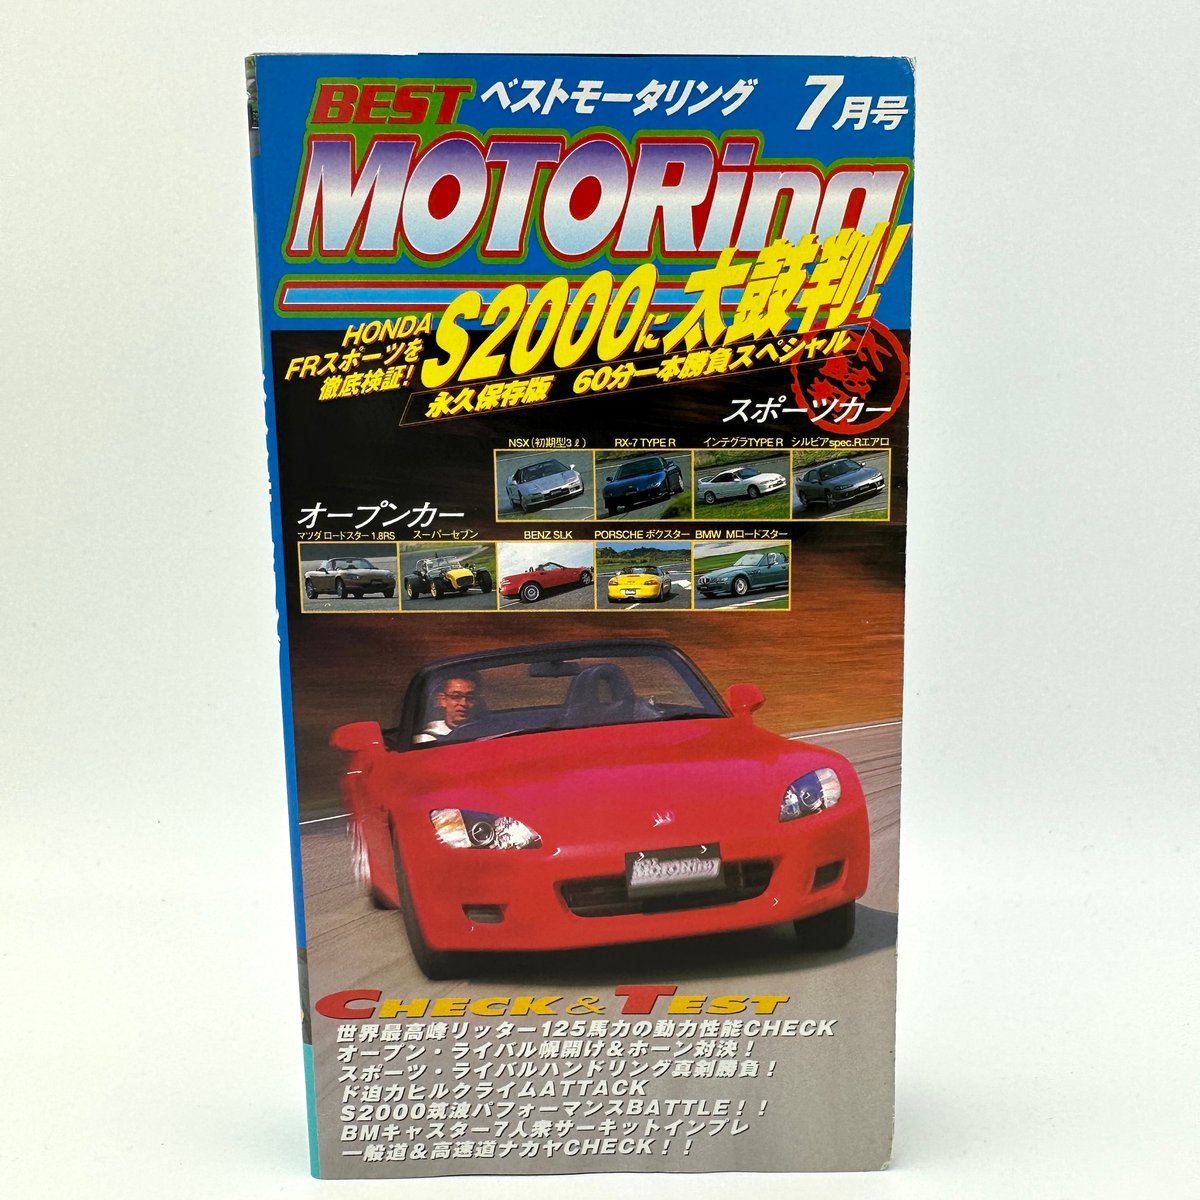 VHS | Best Motoring 1999 7 - S2000 Special Feature | Kaizō Supply Co.